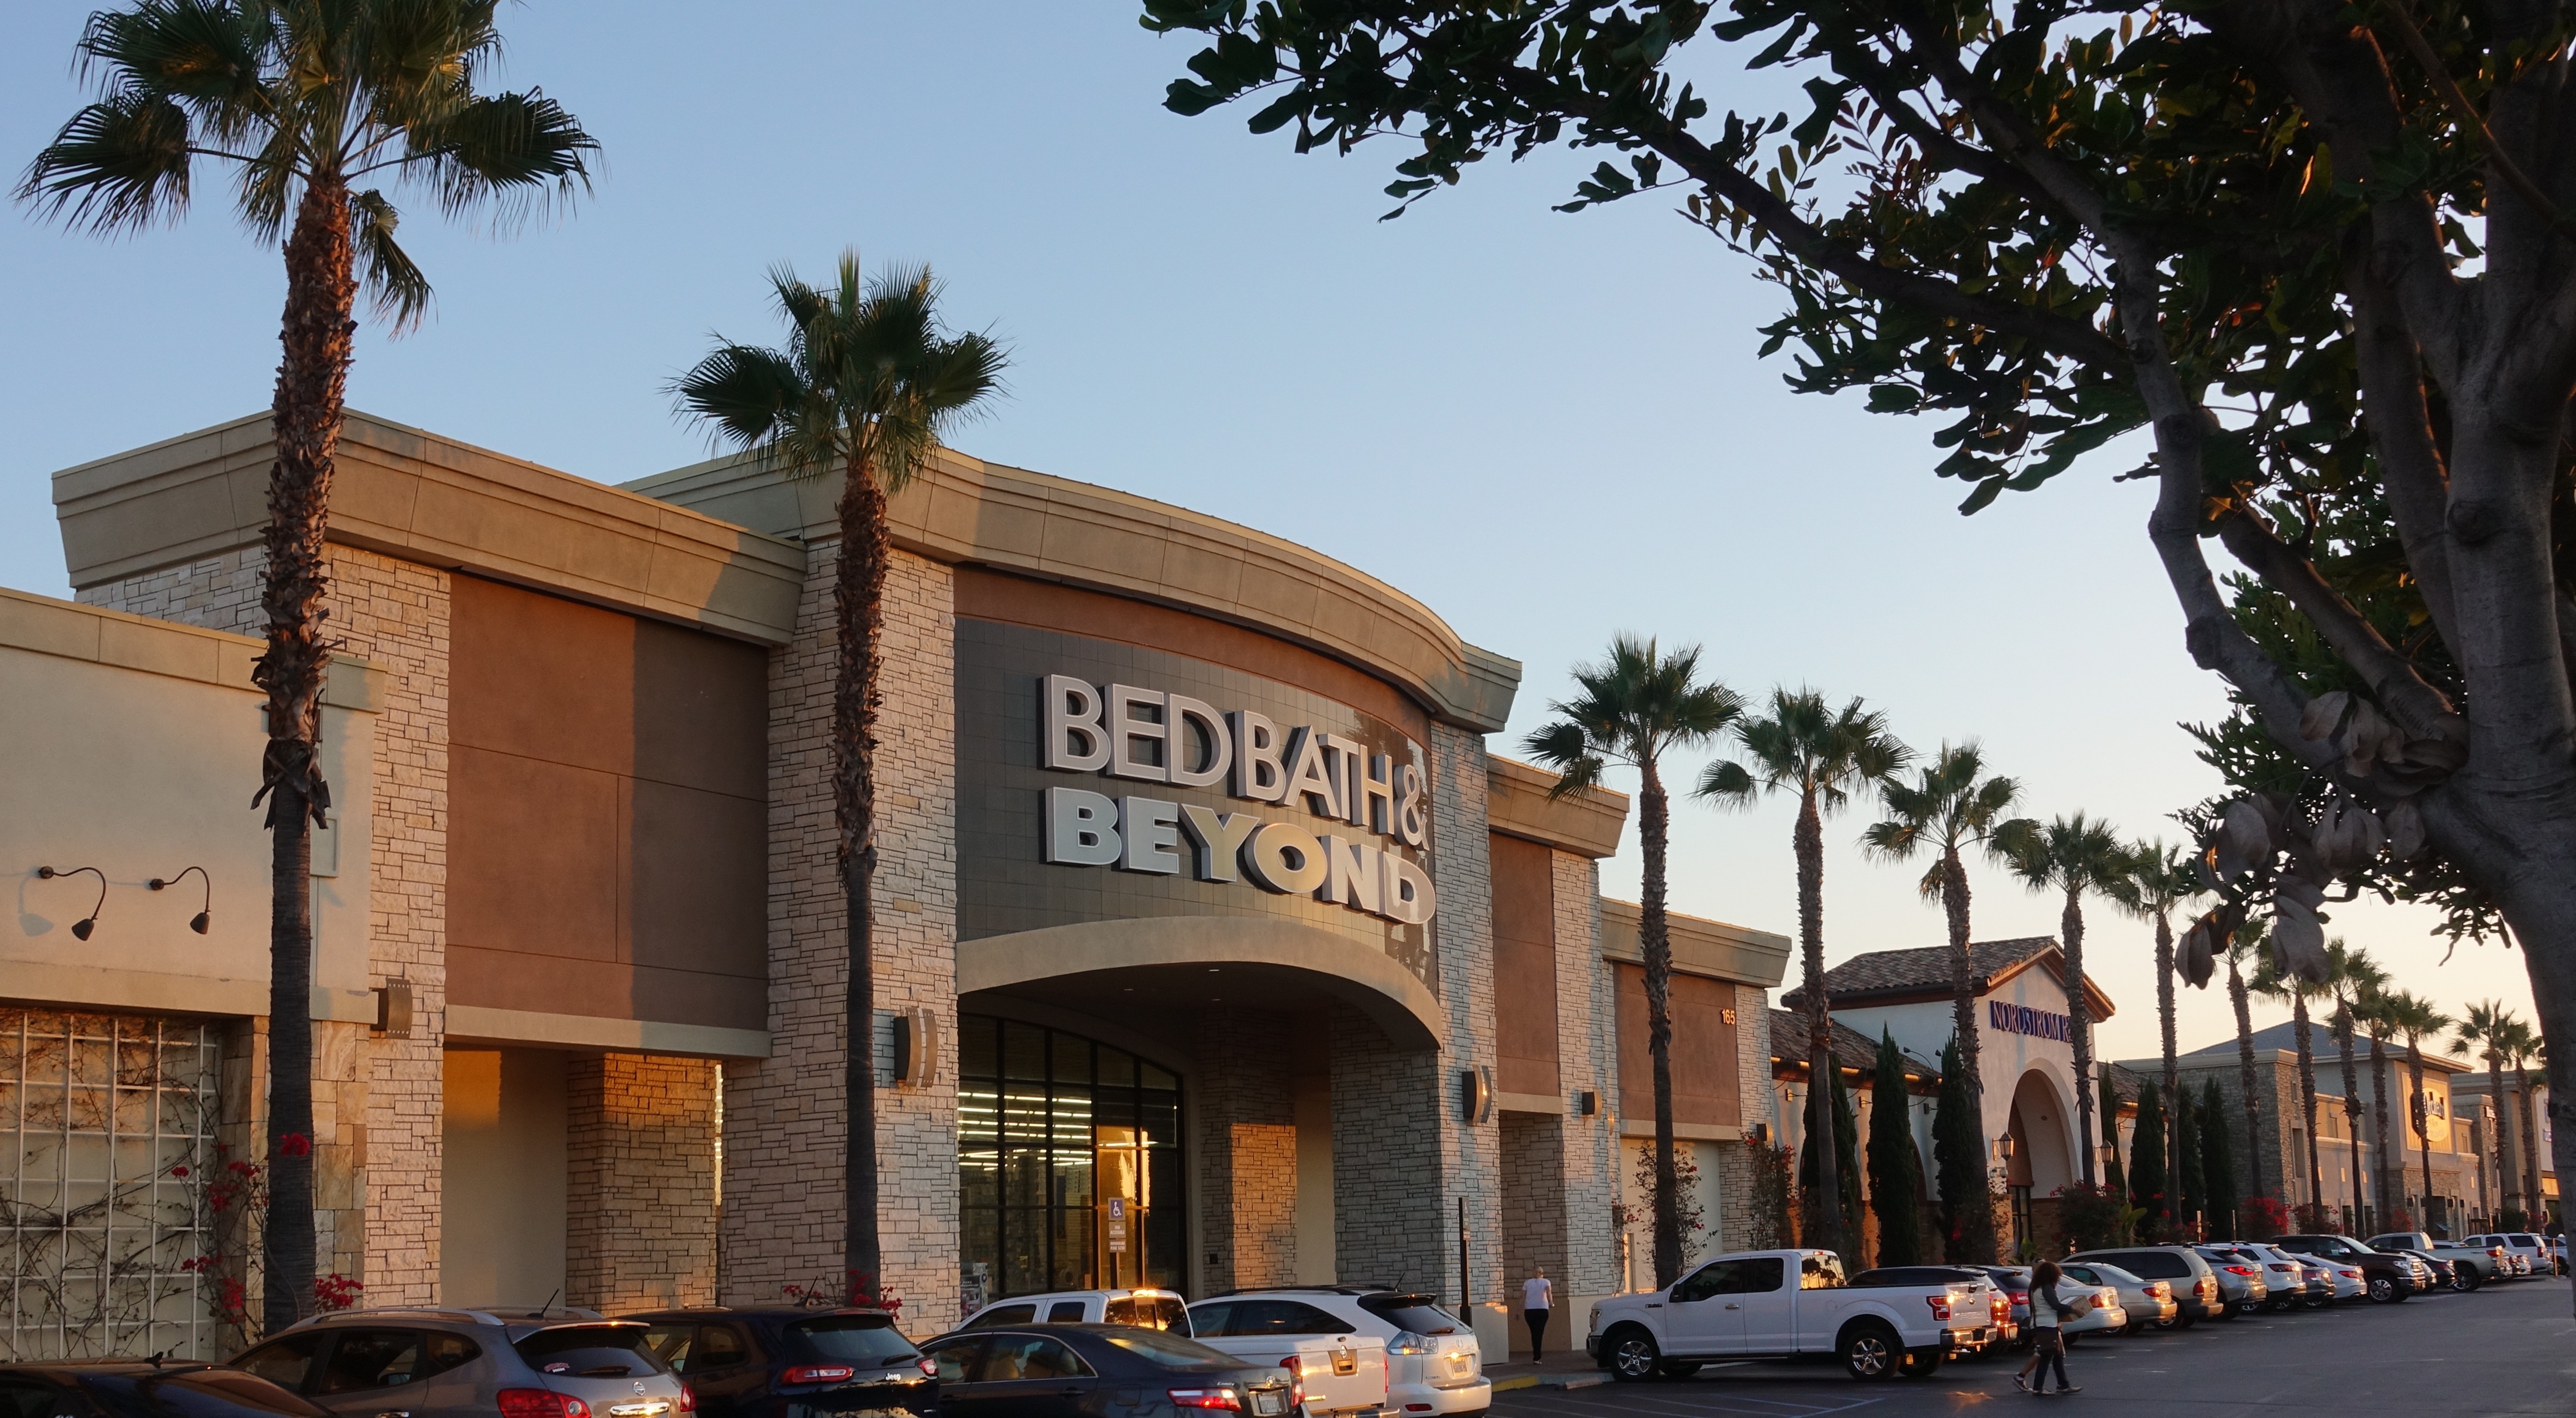 What's Next For Bed Bath & Beyond?